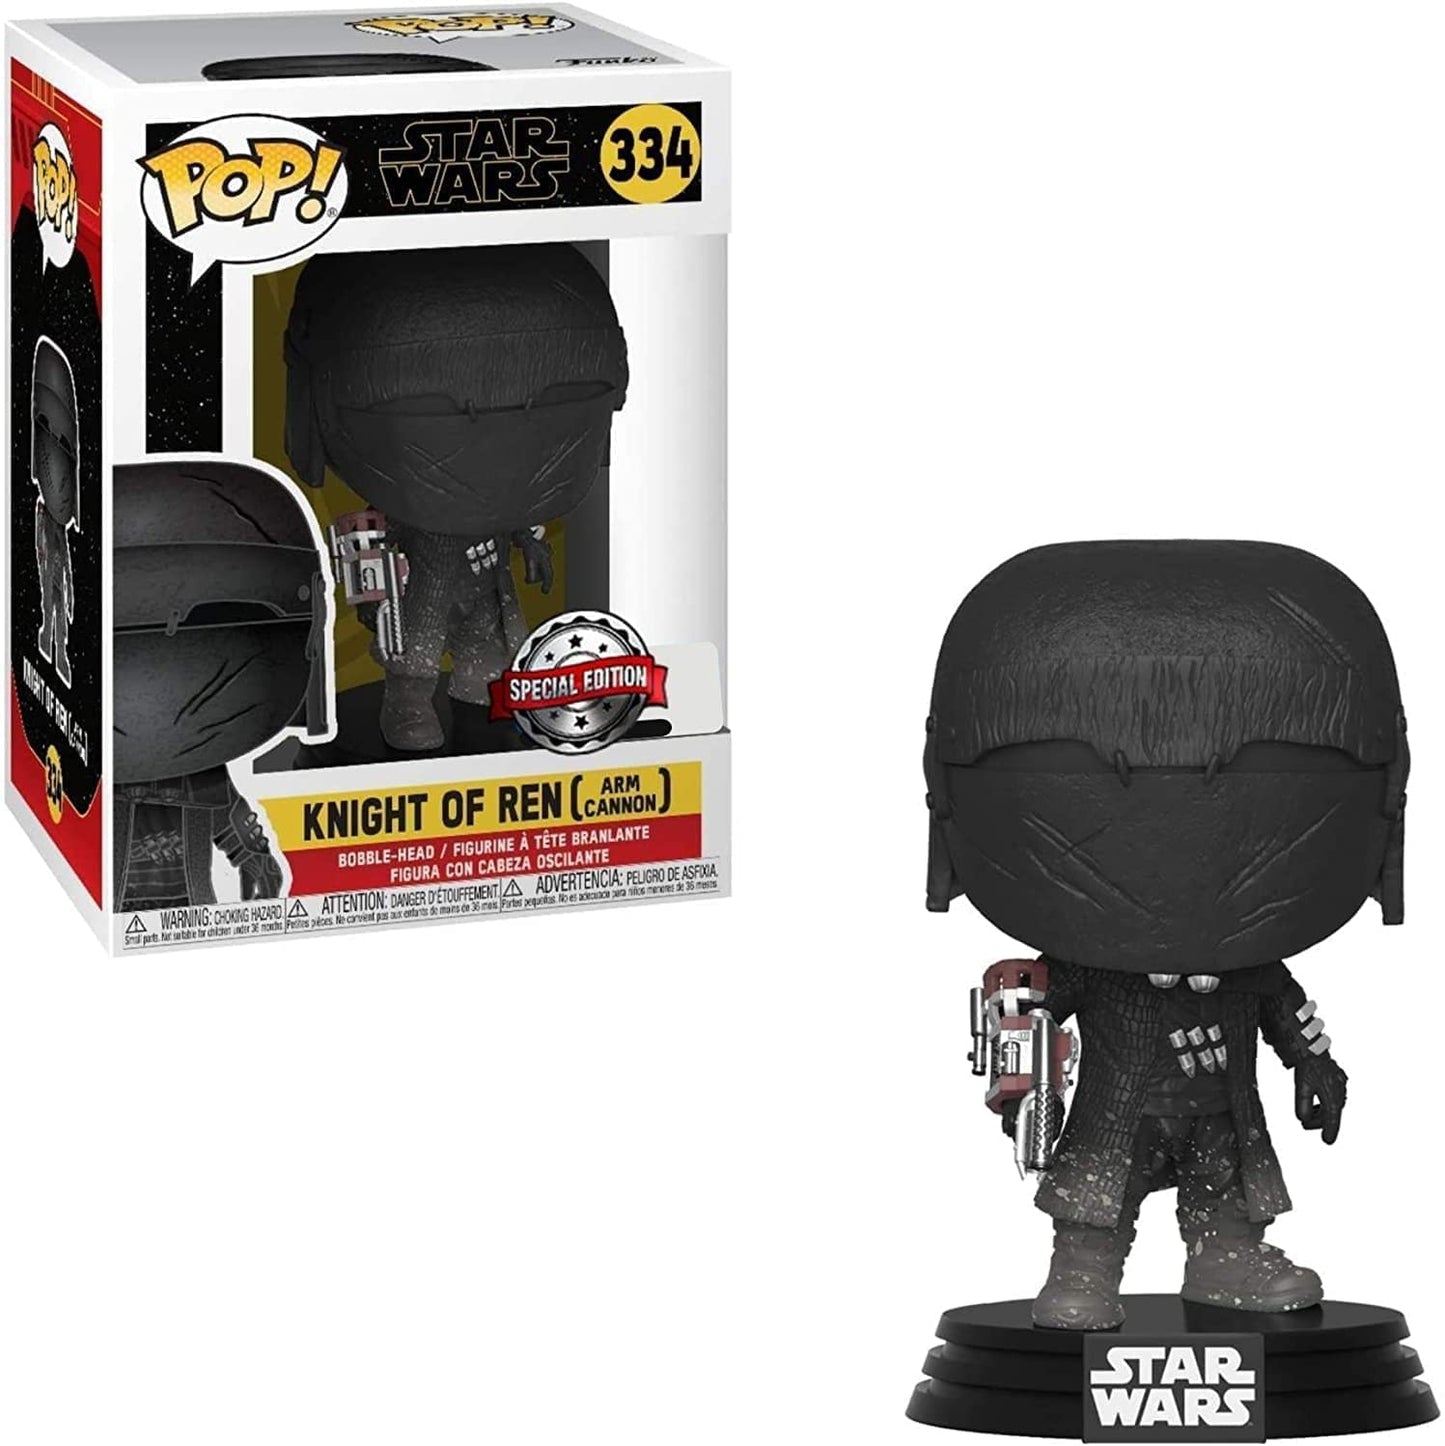 STAR WARS KNIGHT OF REN (ARM CANNON) EXCLUSIVE #334 POP